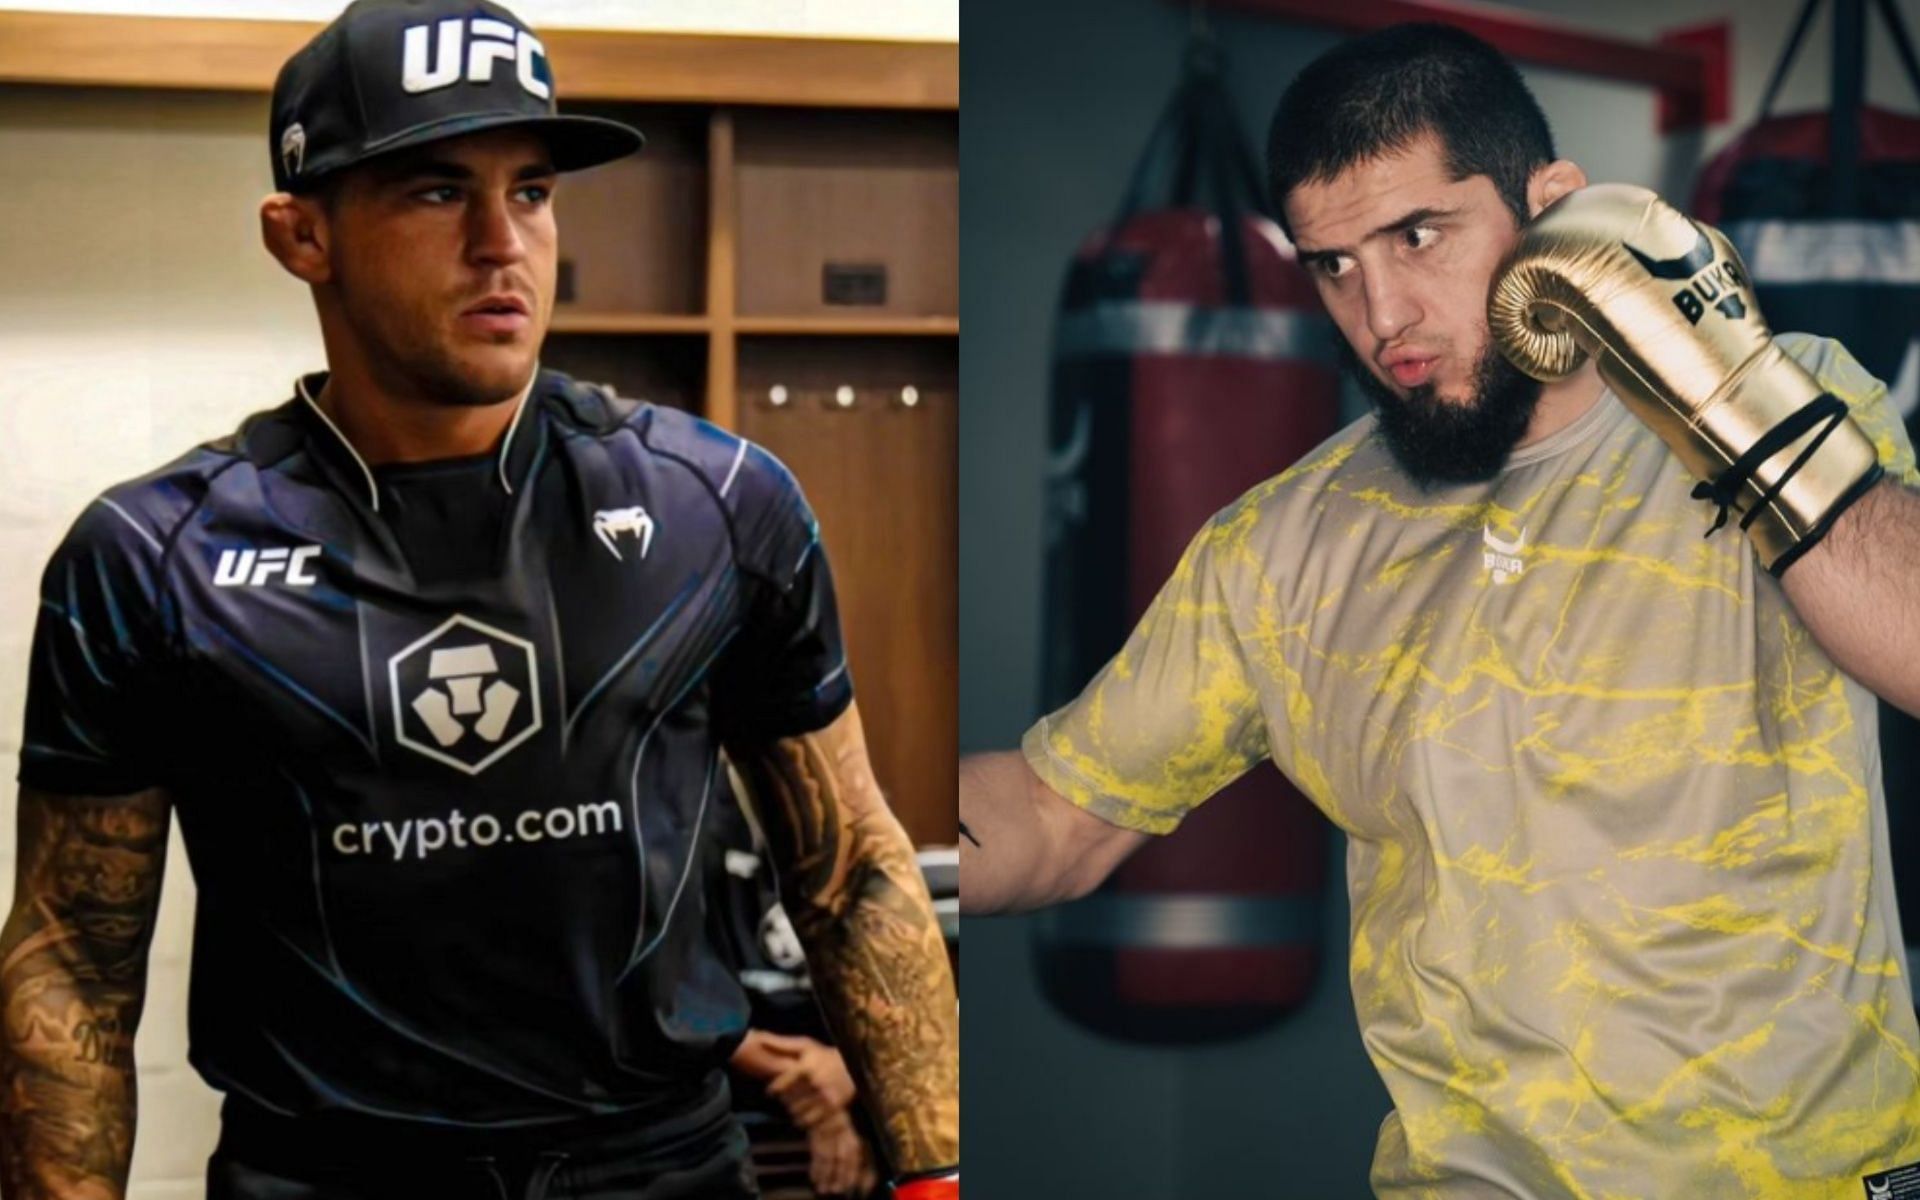 Dustin Poirier recently called for a fight with islam Makhachev. [Images via @dustinpoirier and @islam_makhachev on Instagram]